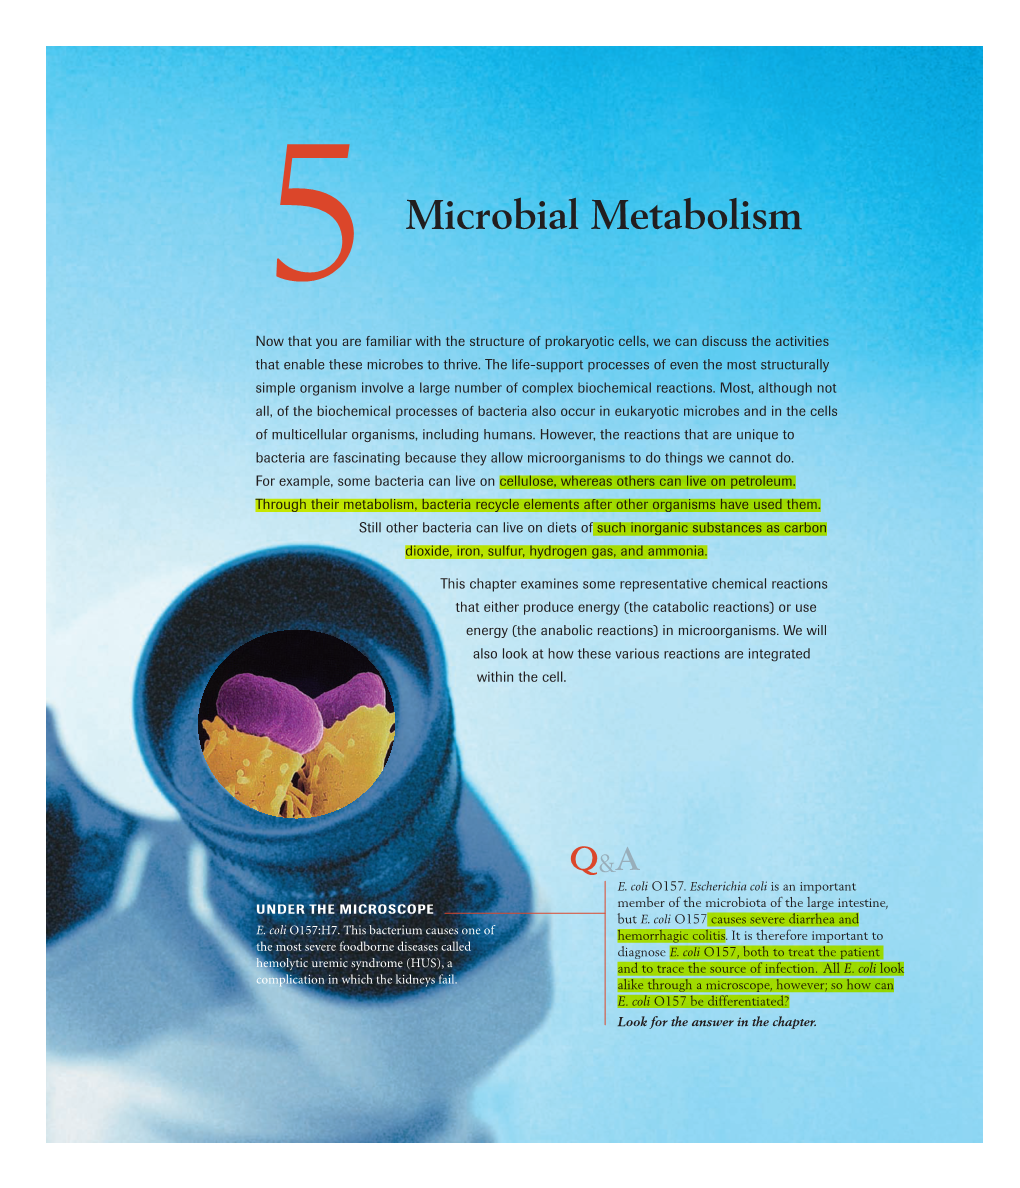 Microbial Metabolism Now That You Are Familiar with the Structure of Prokaryotic Cells, We Can Discuss the Activities That Enable These Microbes to Thrive